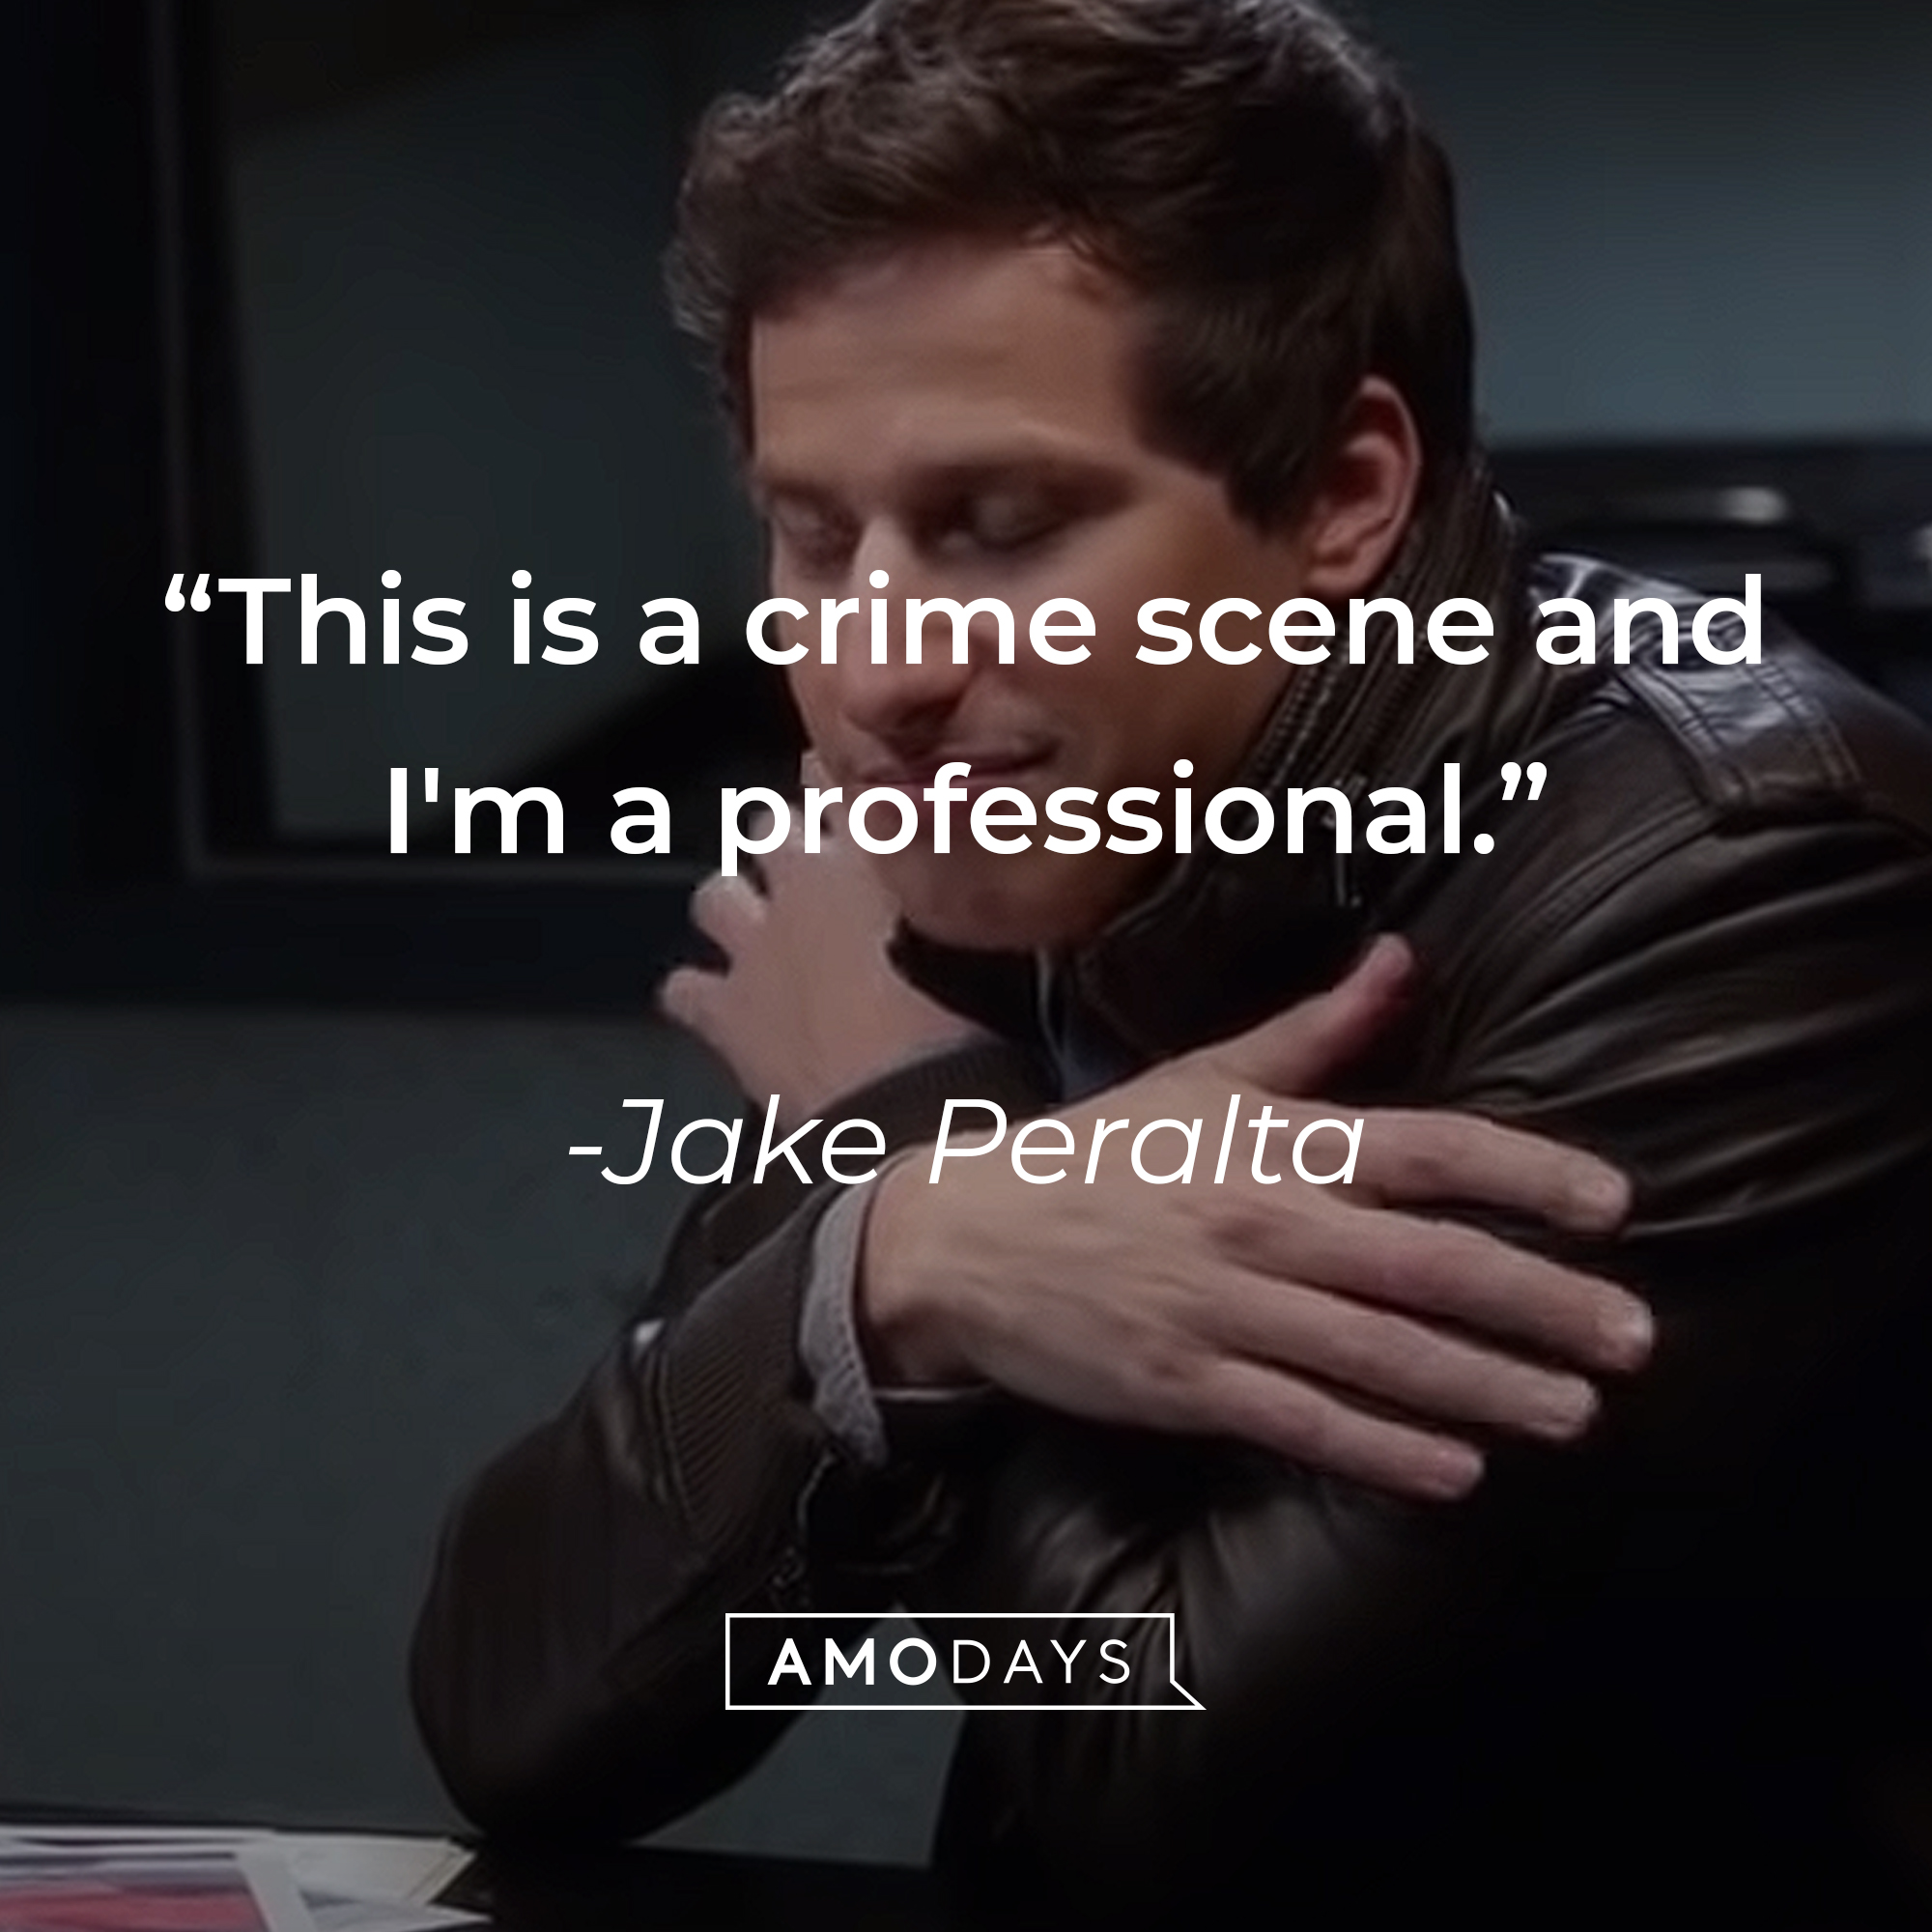 A picture of Jake Peralta with his quote: “This is a crime scene and I'm a professional.” |Source: youtube.com/NBCBrooklyn99